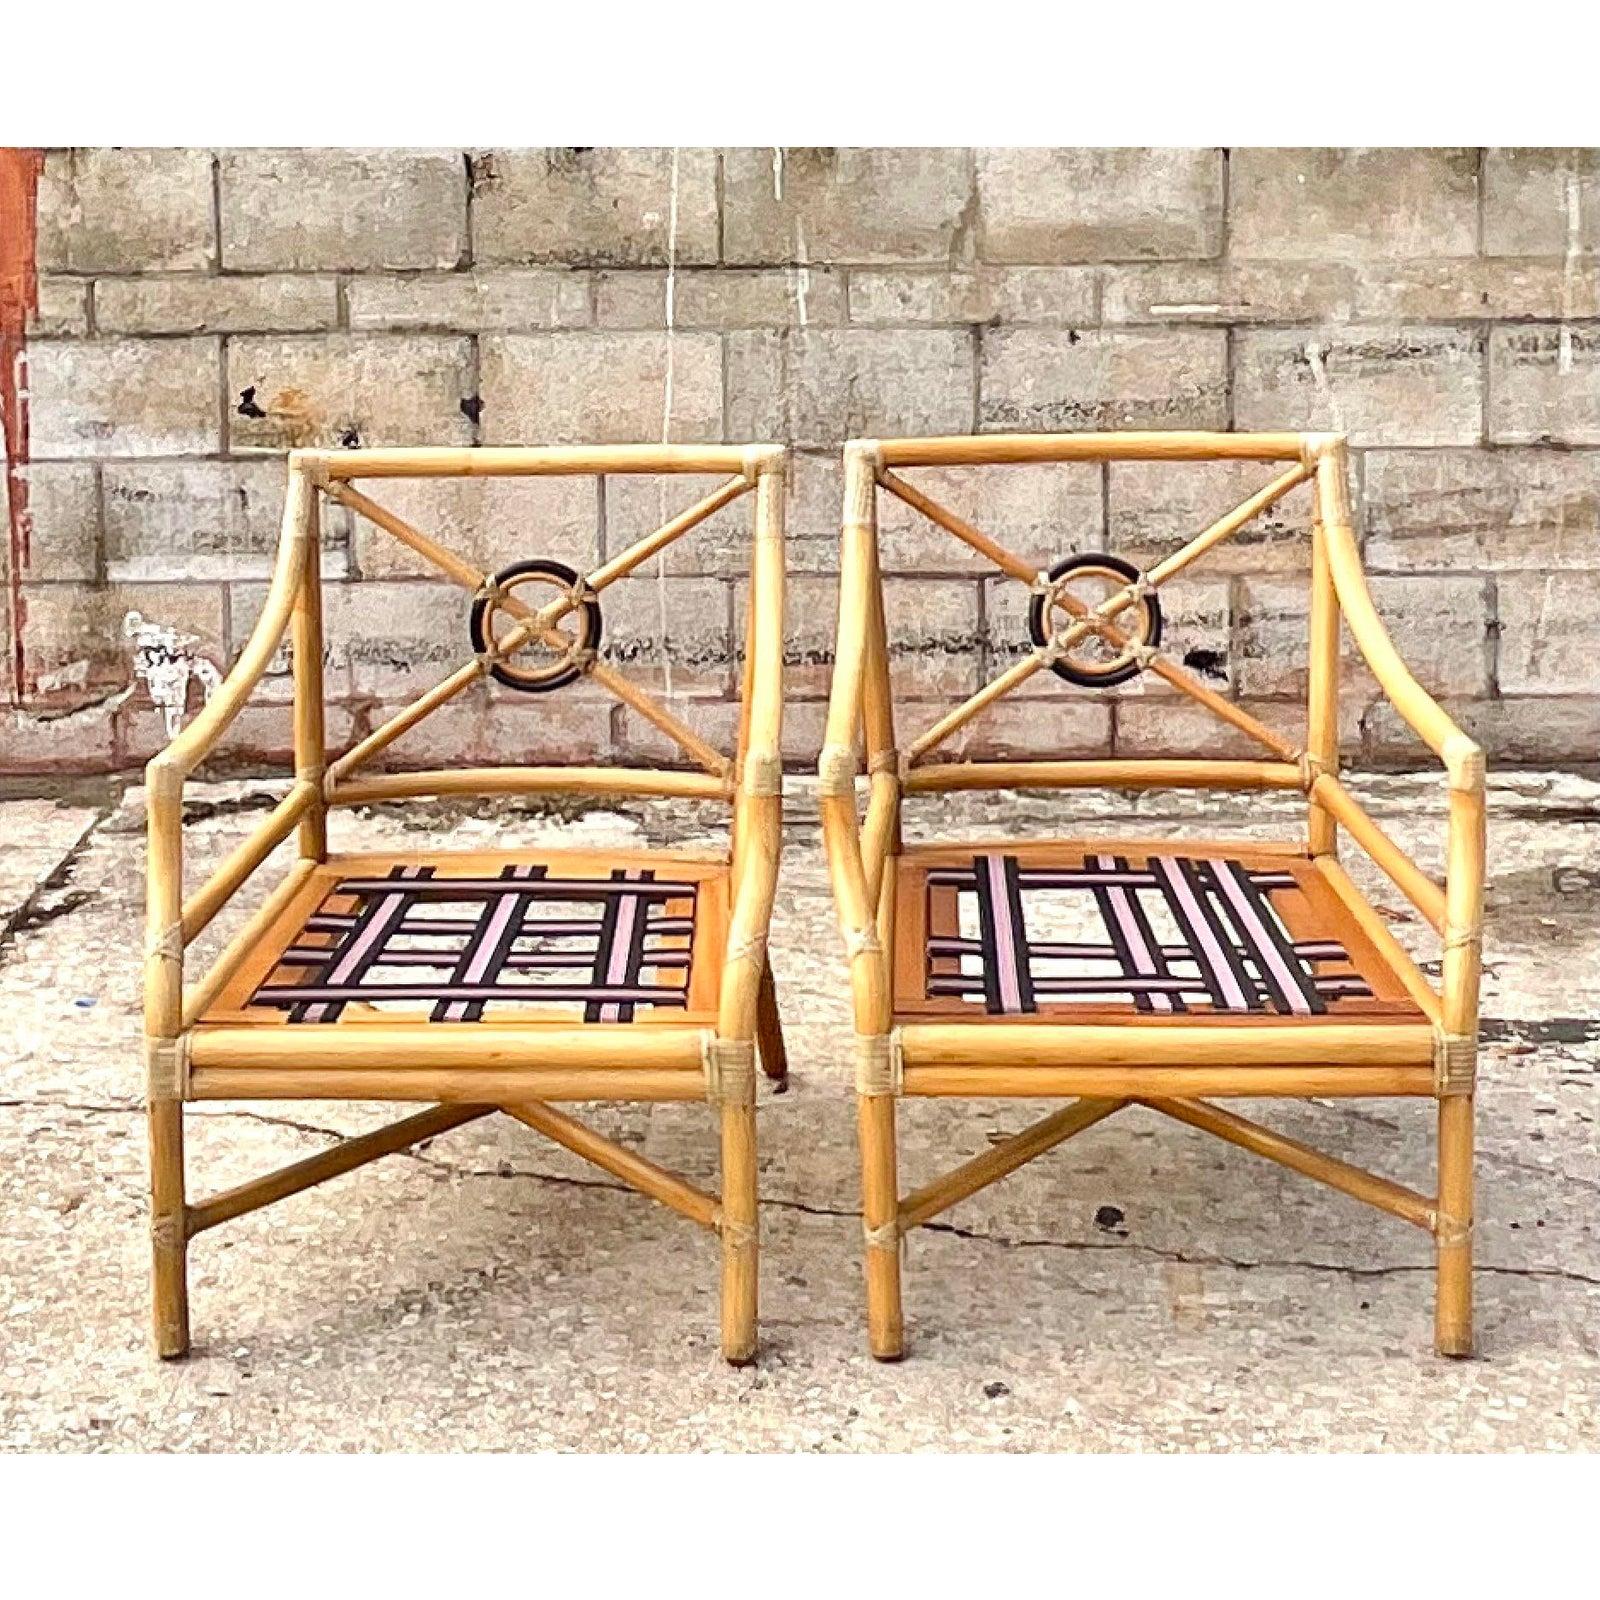 Gorgeous pair of vintage McGuire lounge chairs. The iconic Target Back design with the McGuire logo on the bottom. Deep seats for extra relaxation. Acquired from a Palm Beach estate.